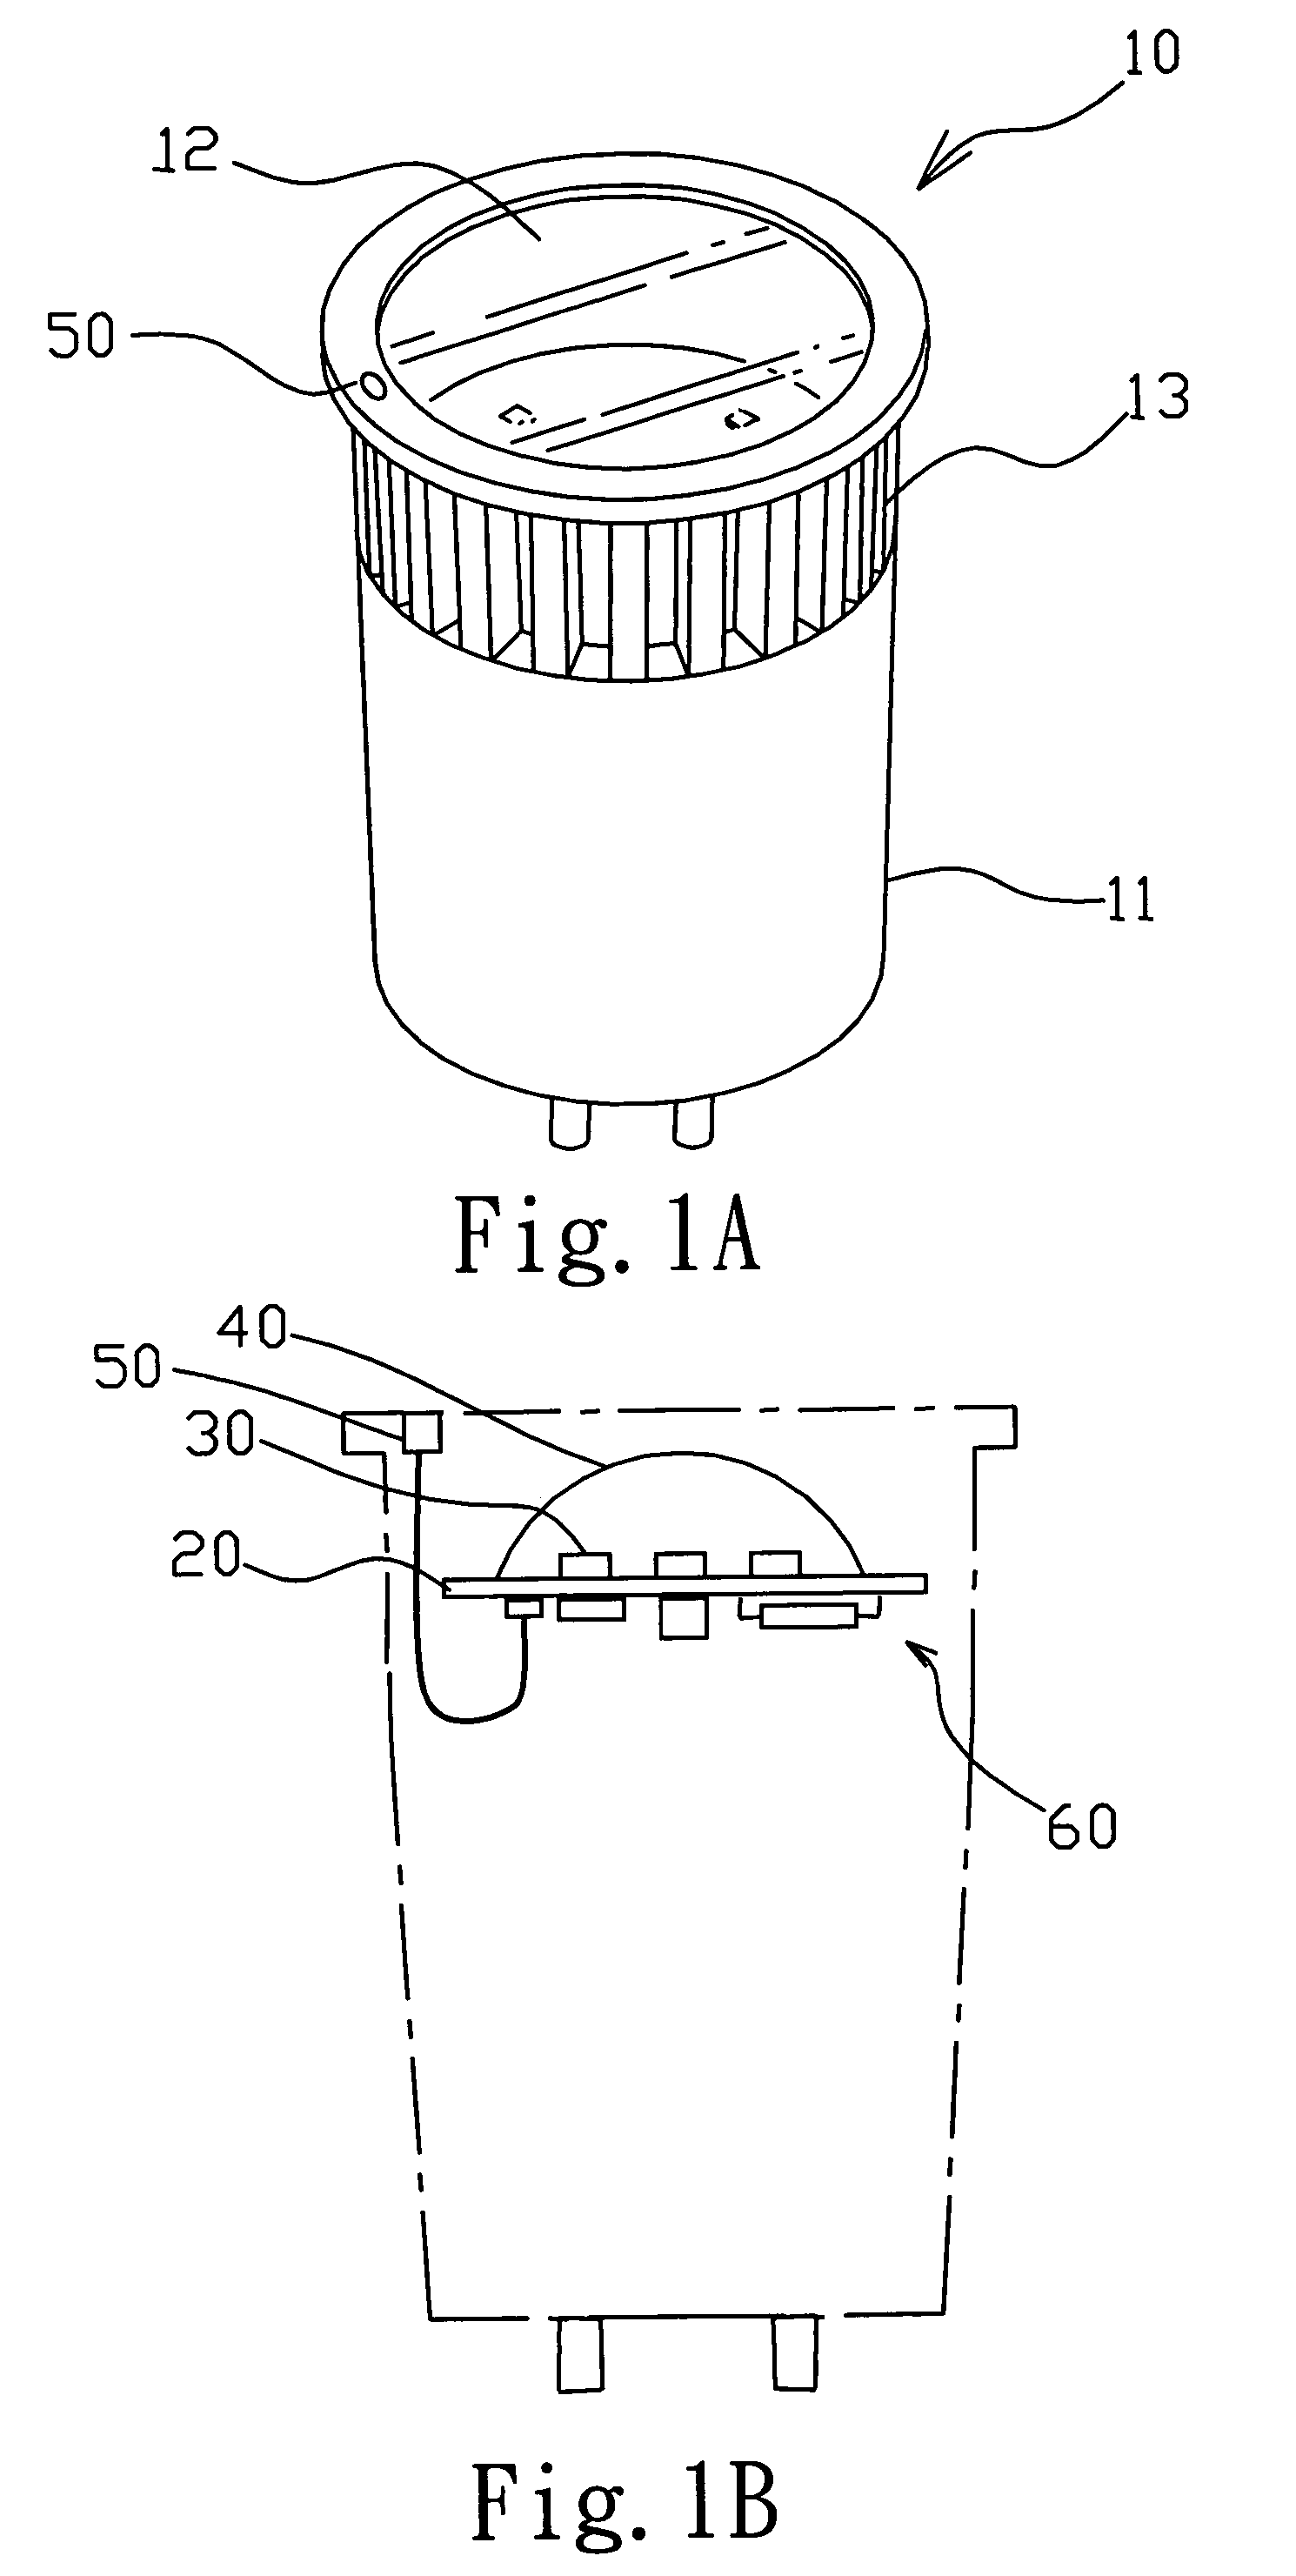 Sound control for changing light color of LED illumination device